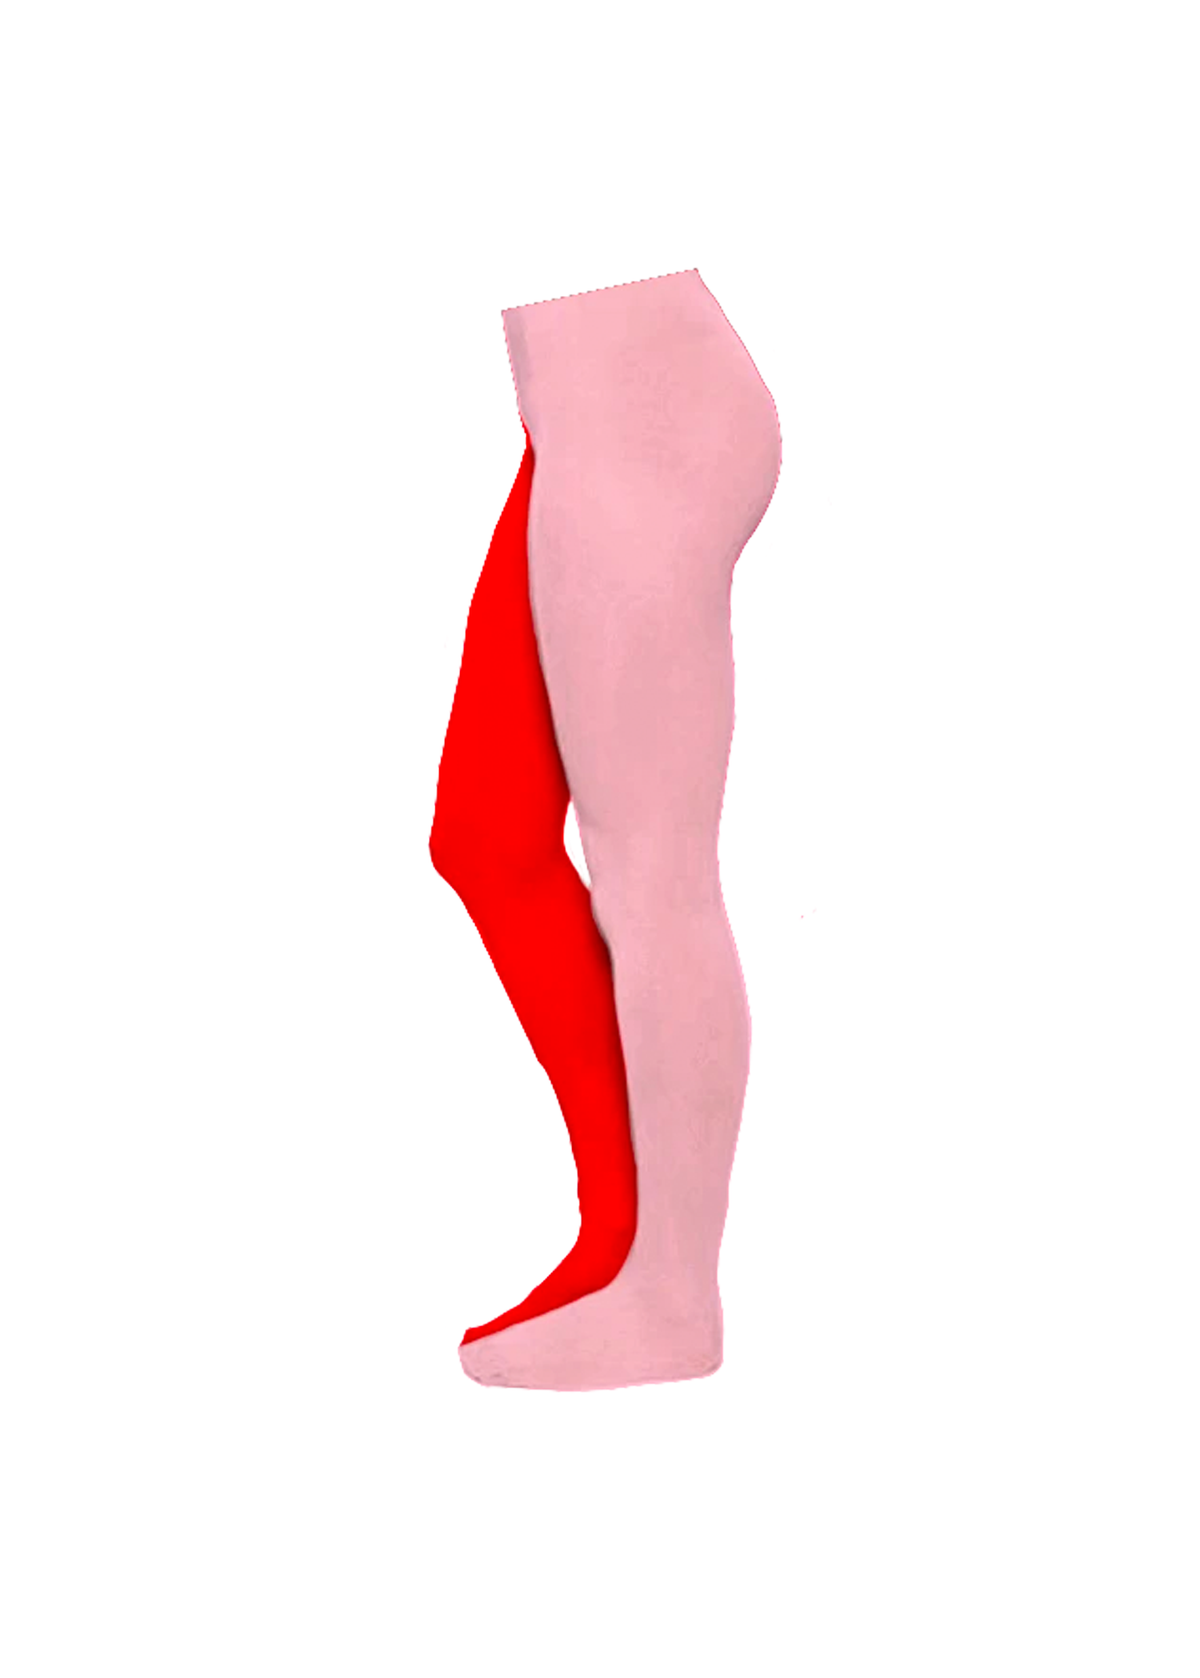 Black/Hot Pink, Queen/Plus Size Fun Striped Opaque Tights